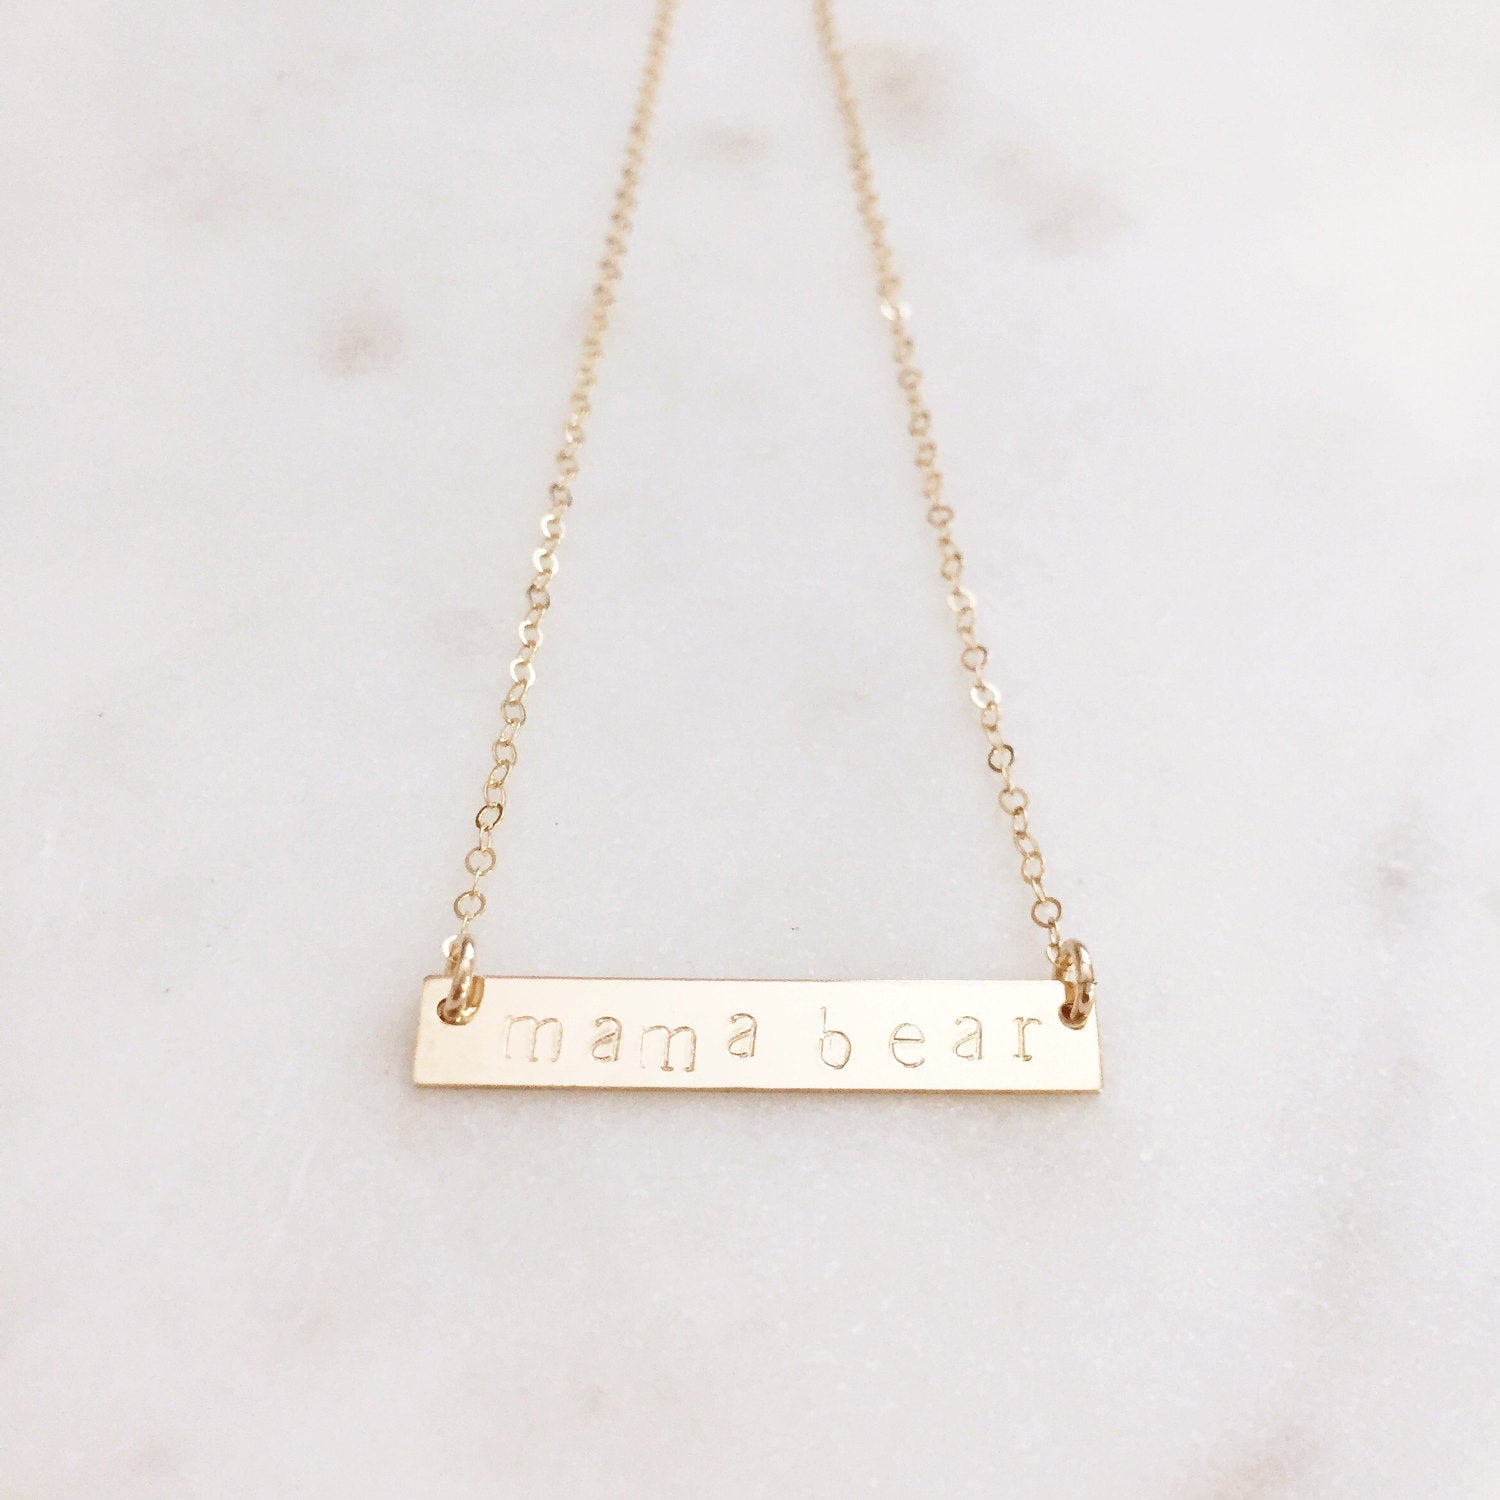 Mama Bear Necklace, Mom Gift, Gold Filled Bar Necklace, Mothers Day Gift, New Mom Necklace, New Mom Jewelry, Dainty Gold Bar Necklace